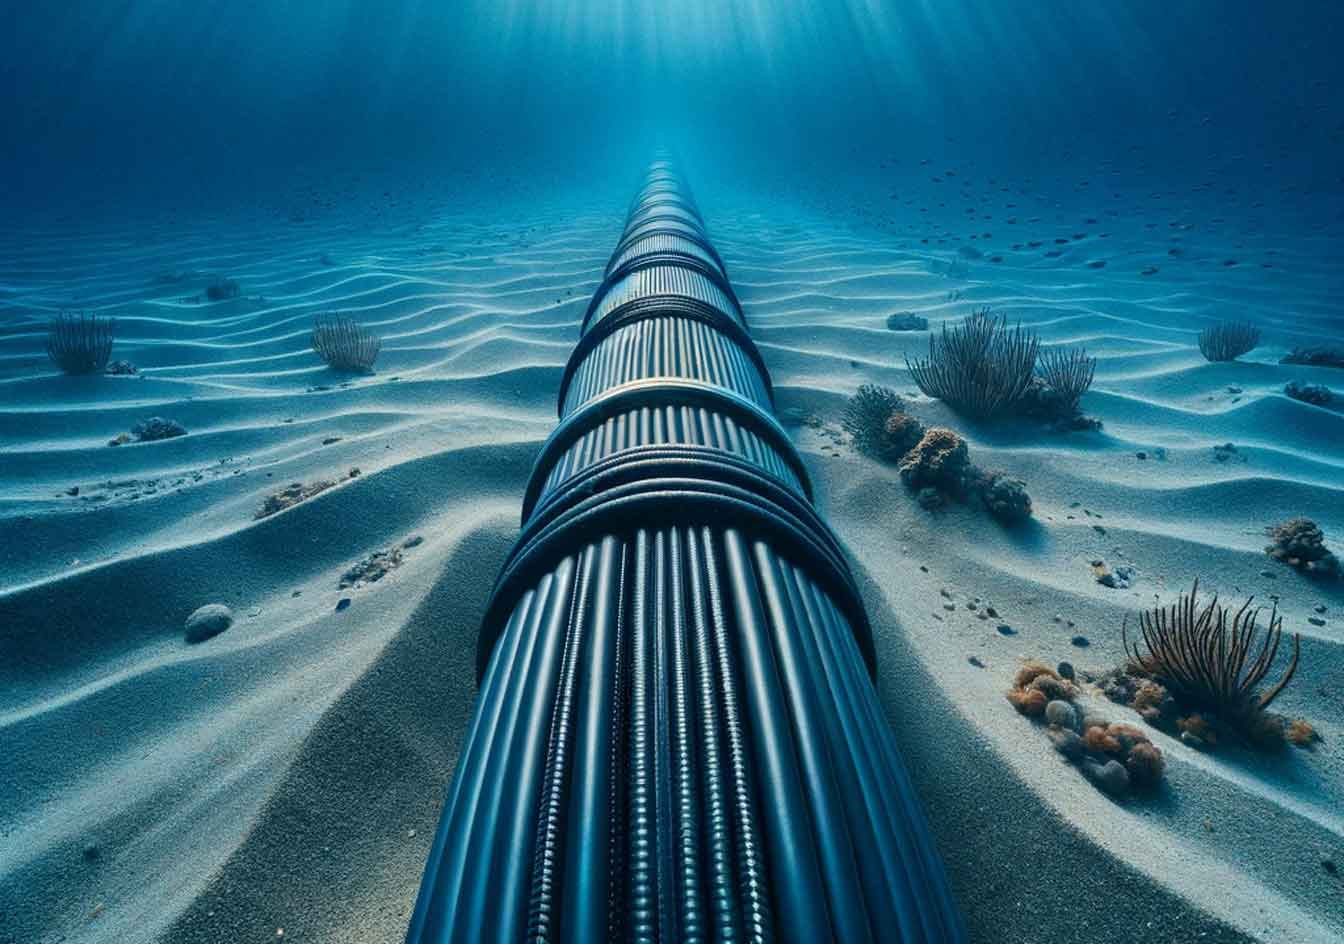 The Red Sea cables threat and global risk: Undersea sabotage